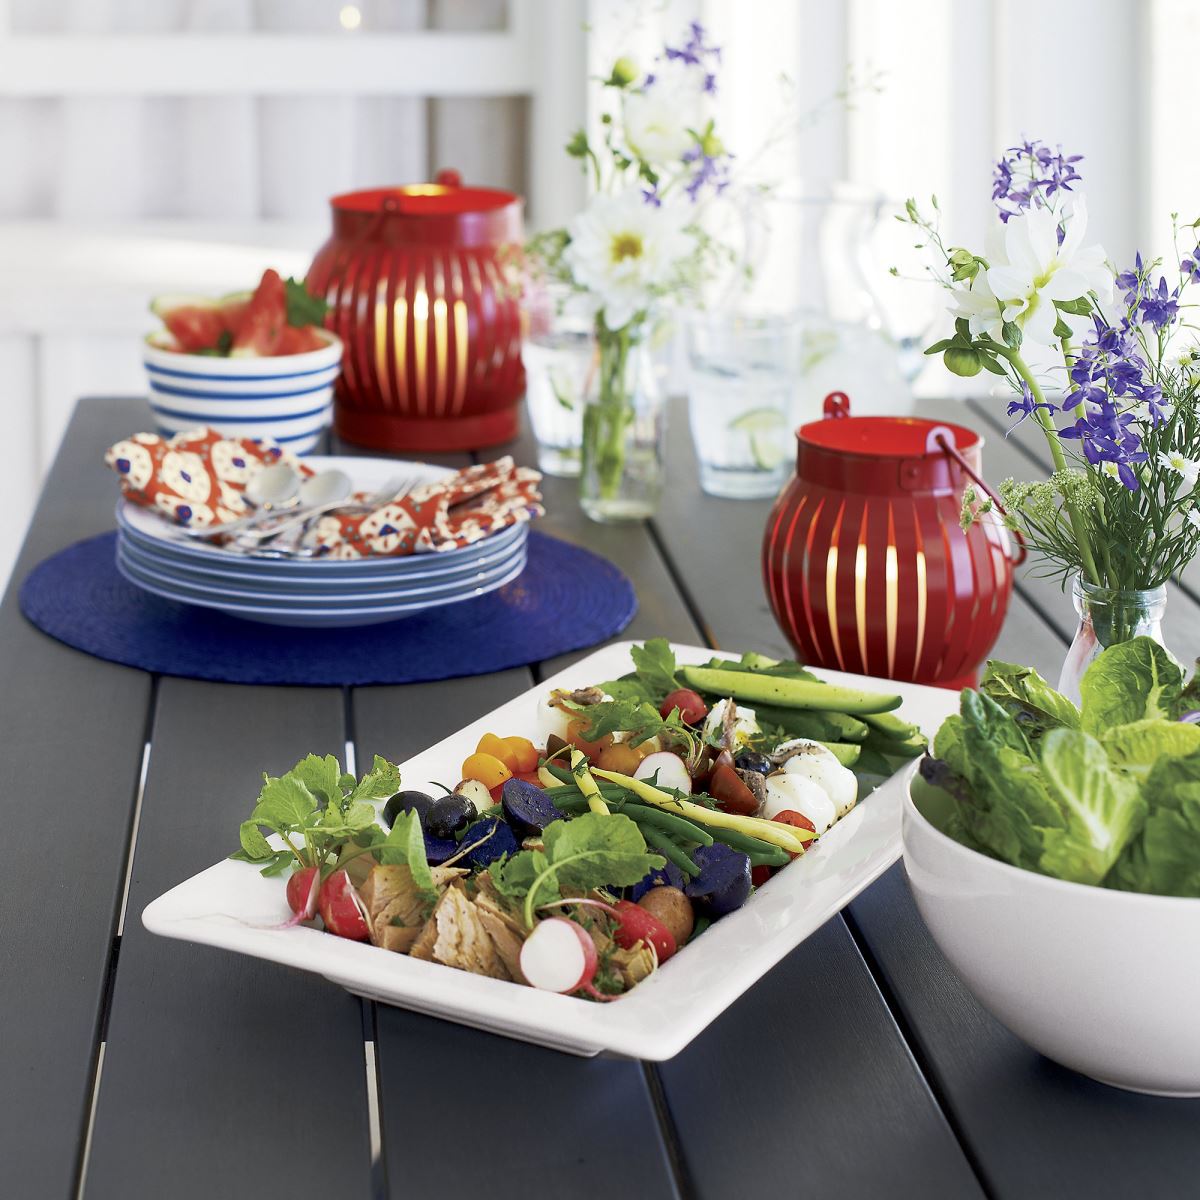 4th of July style from Crate & Barrel